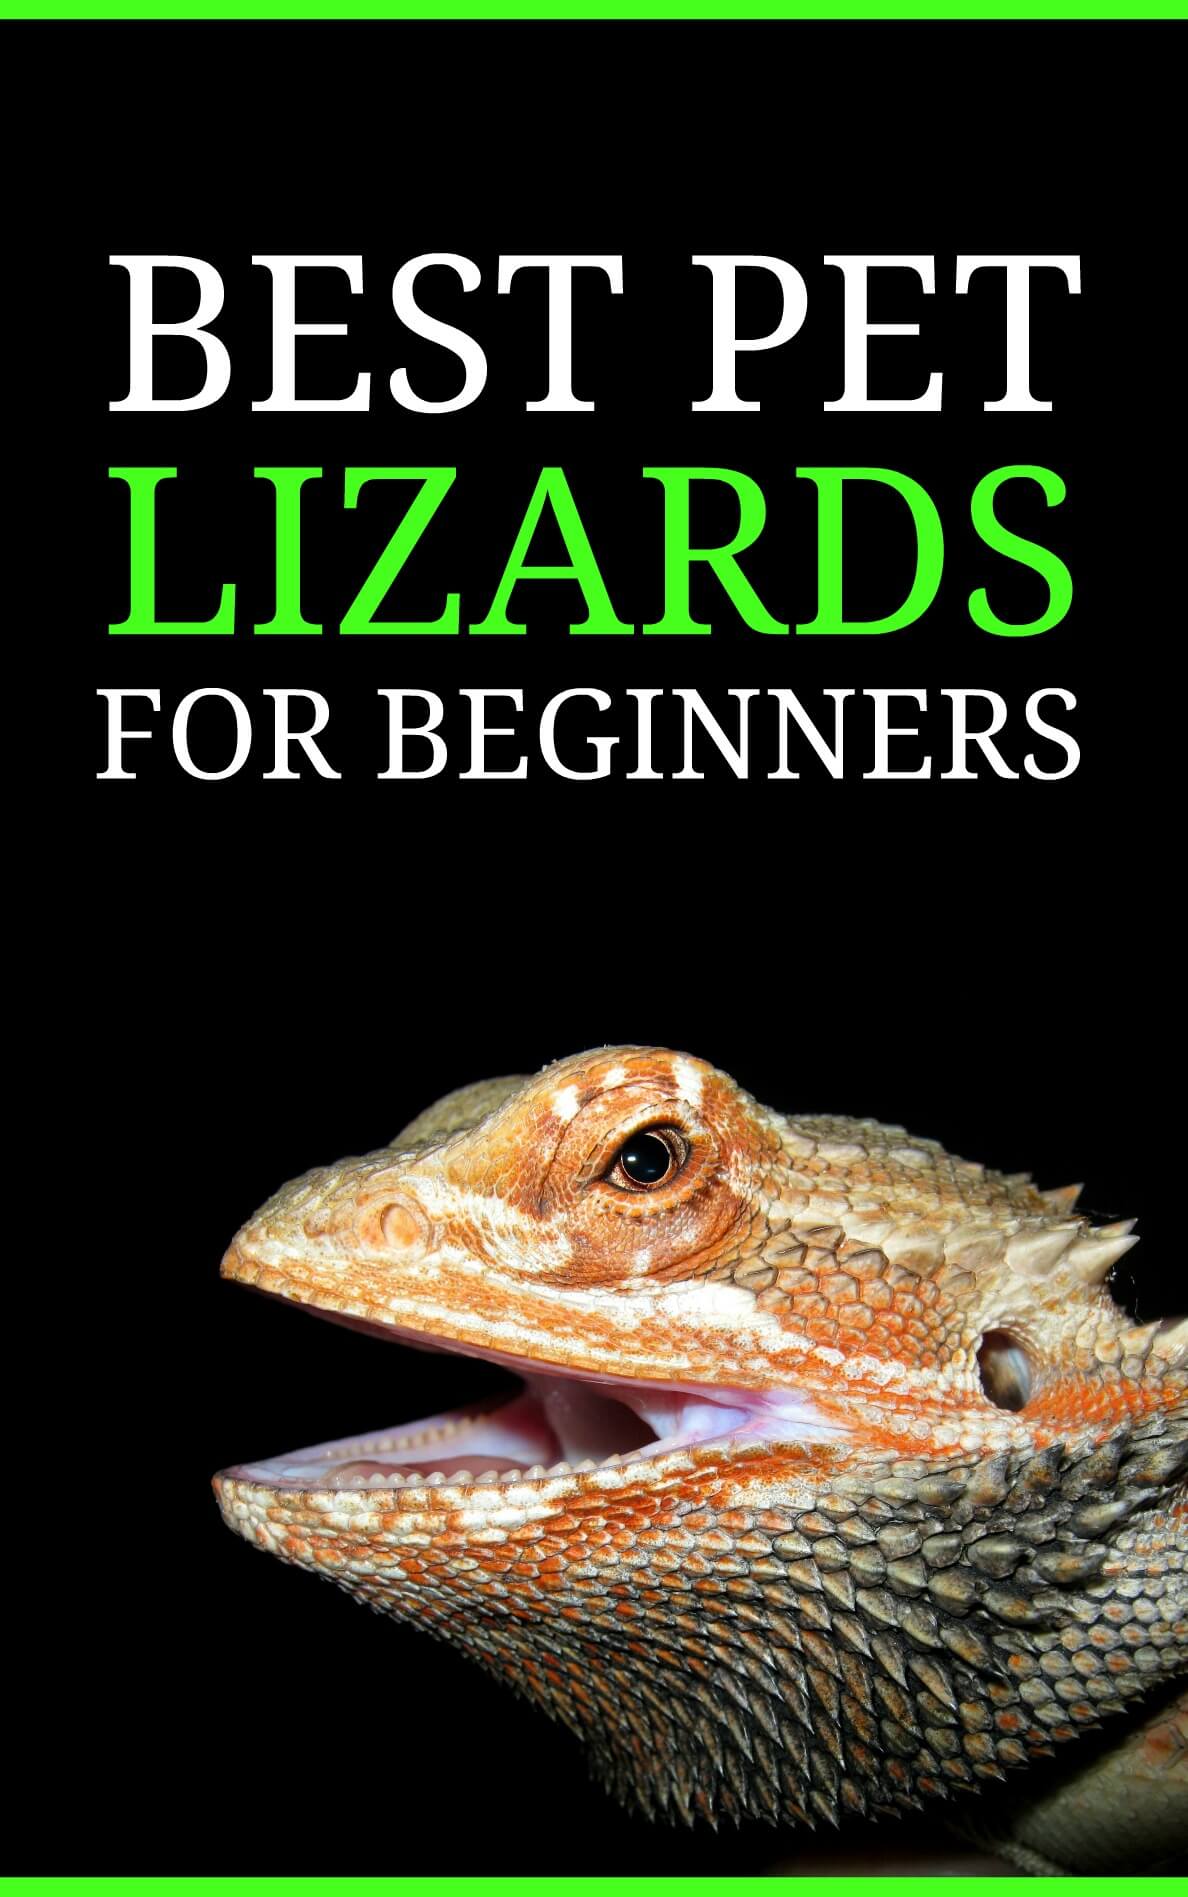 Easy To Keep Lizards Perfect For Beginners Pbs Pet Travel